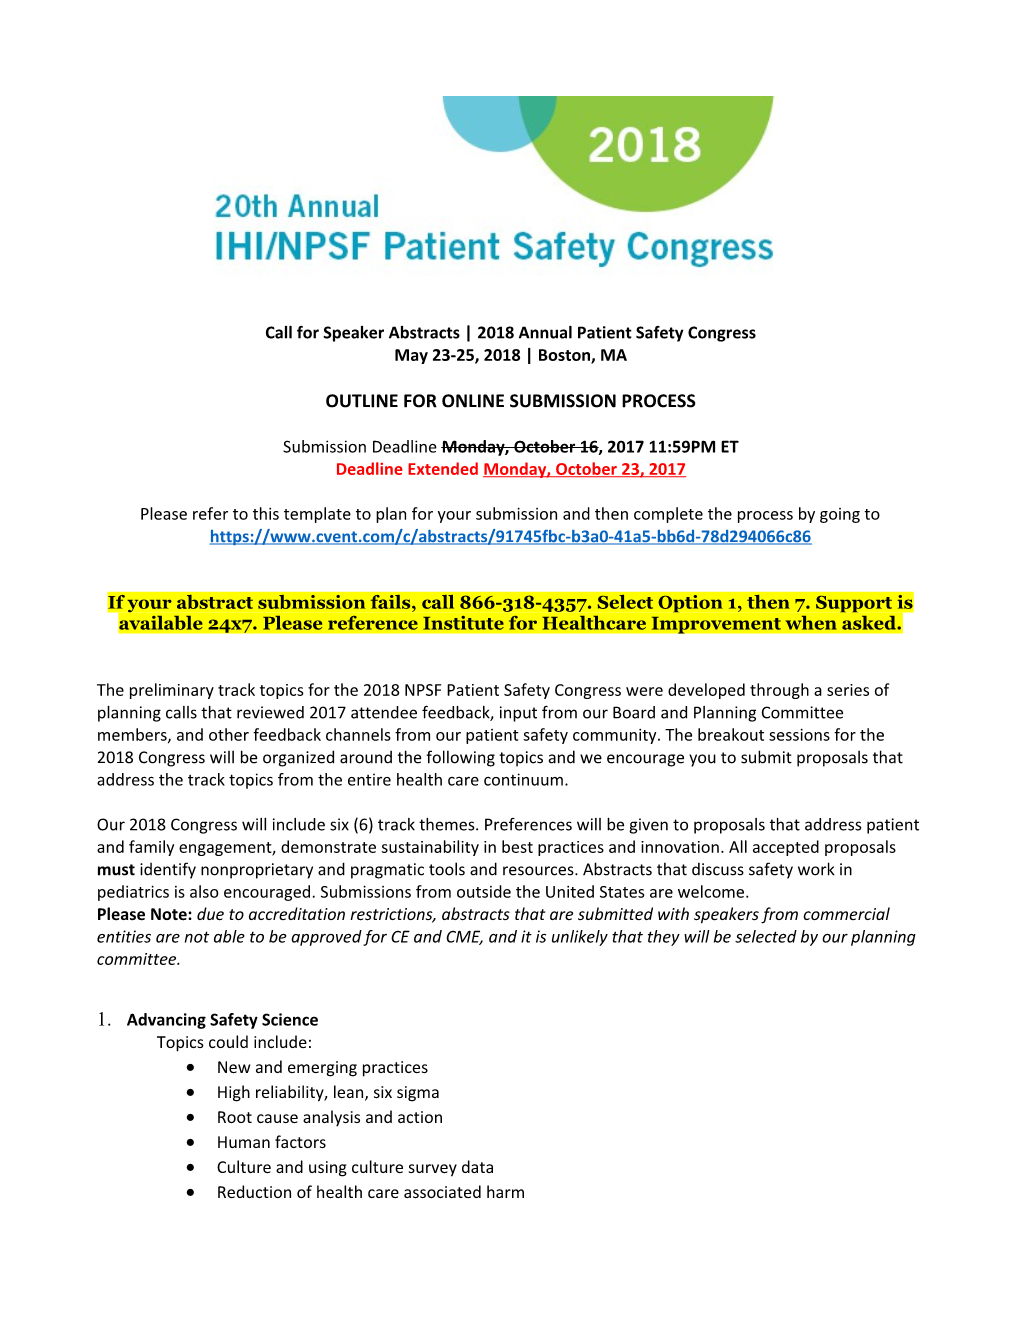 Call for Speaker Abstracts 2018Annual Patient Safety Congress